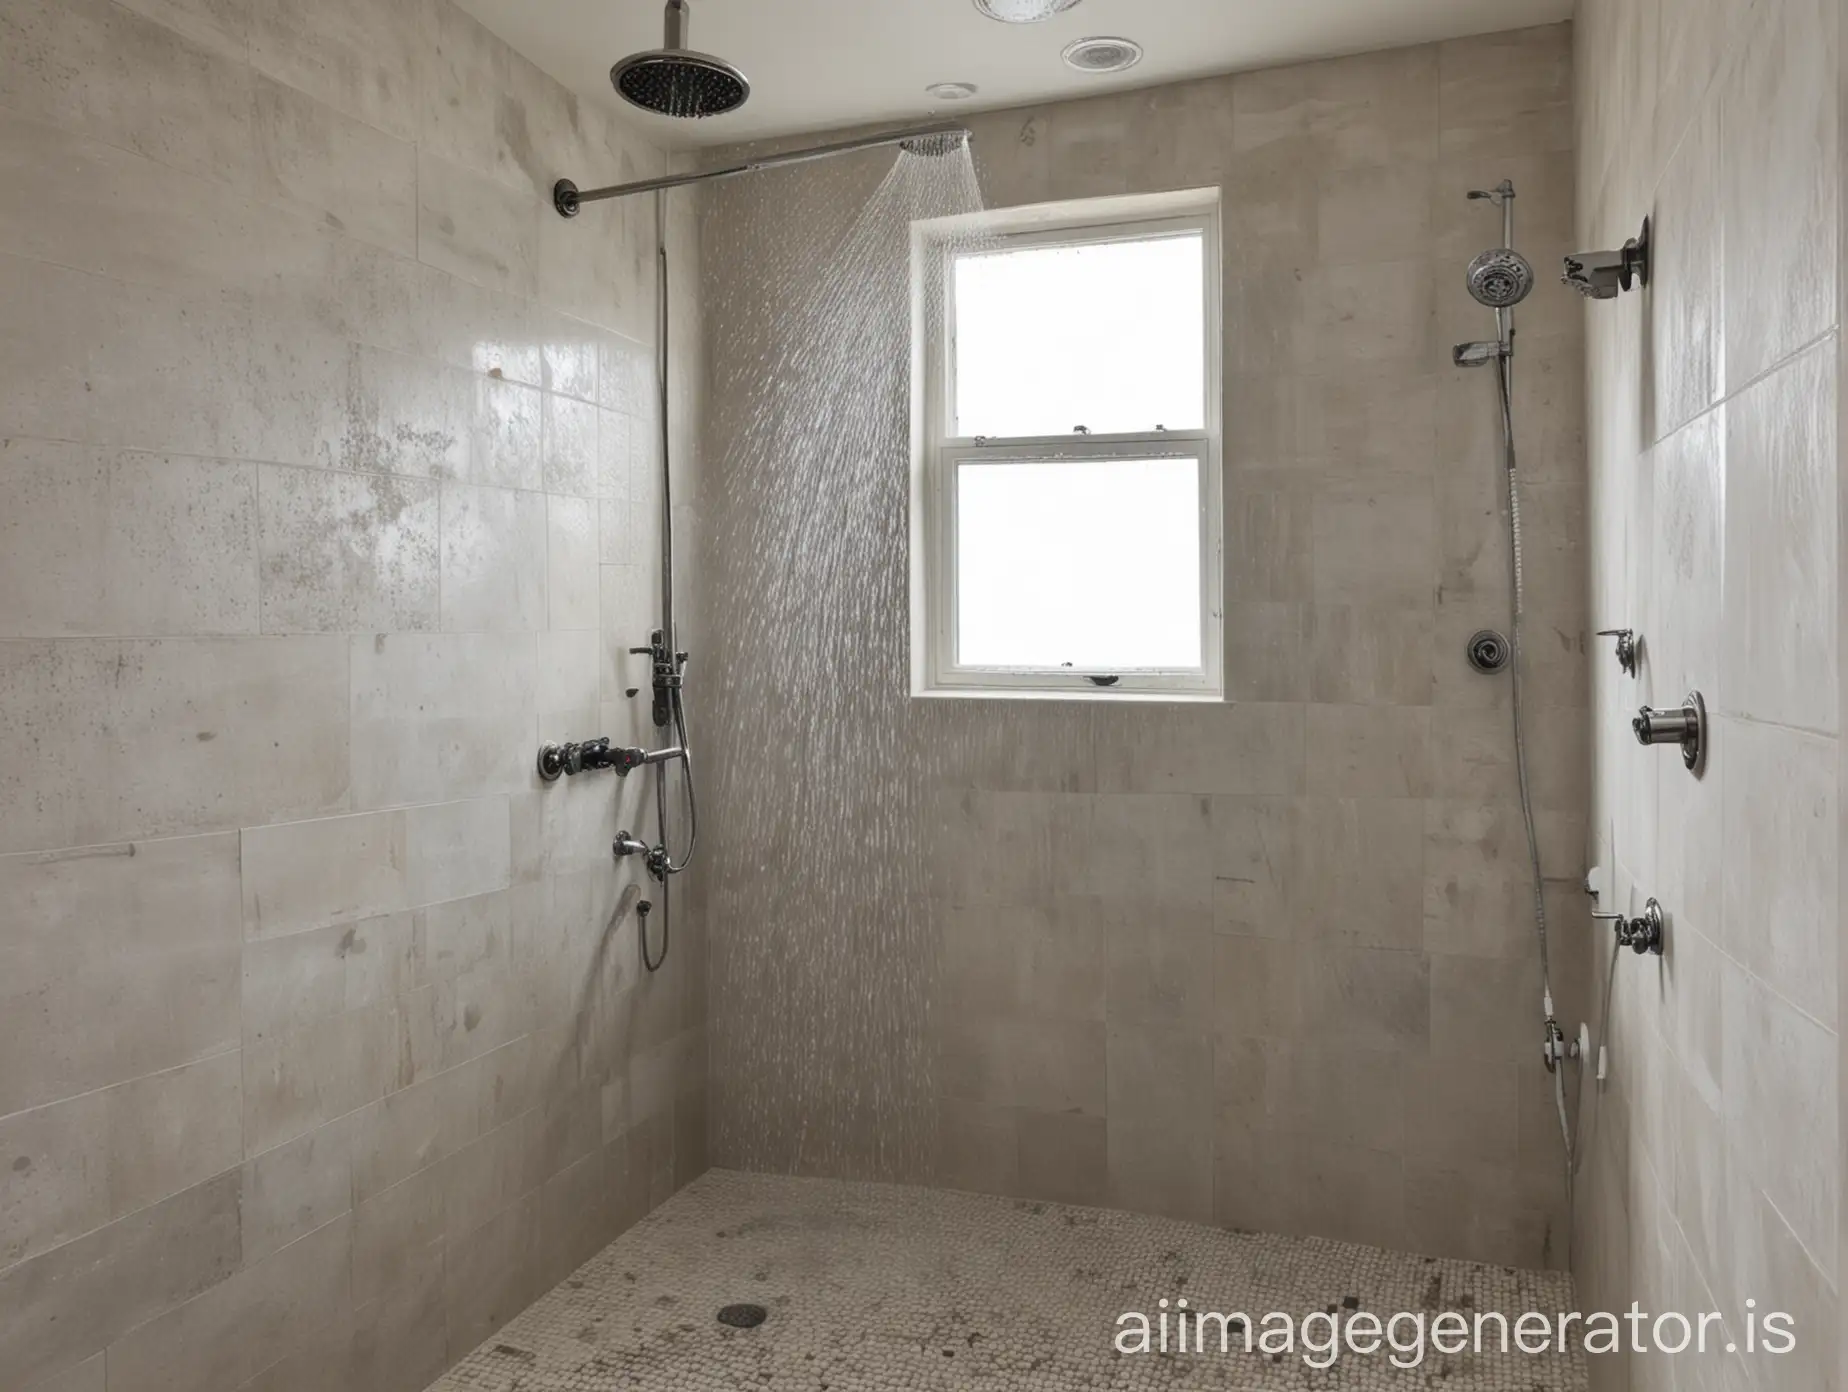 show a bathroom with shower spraying water